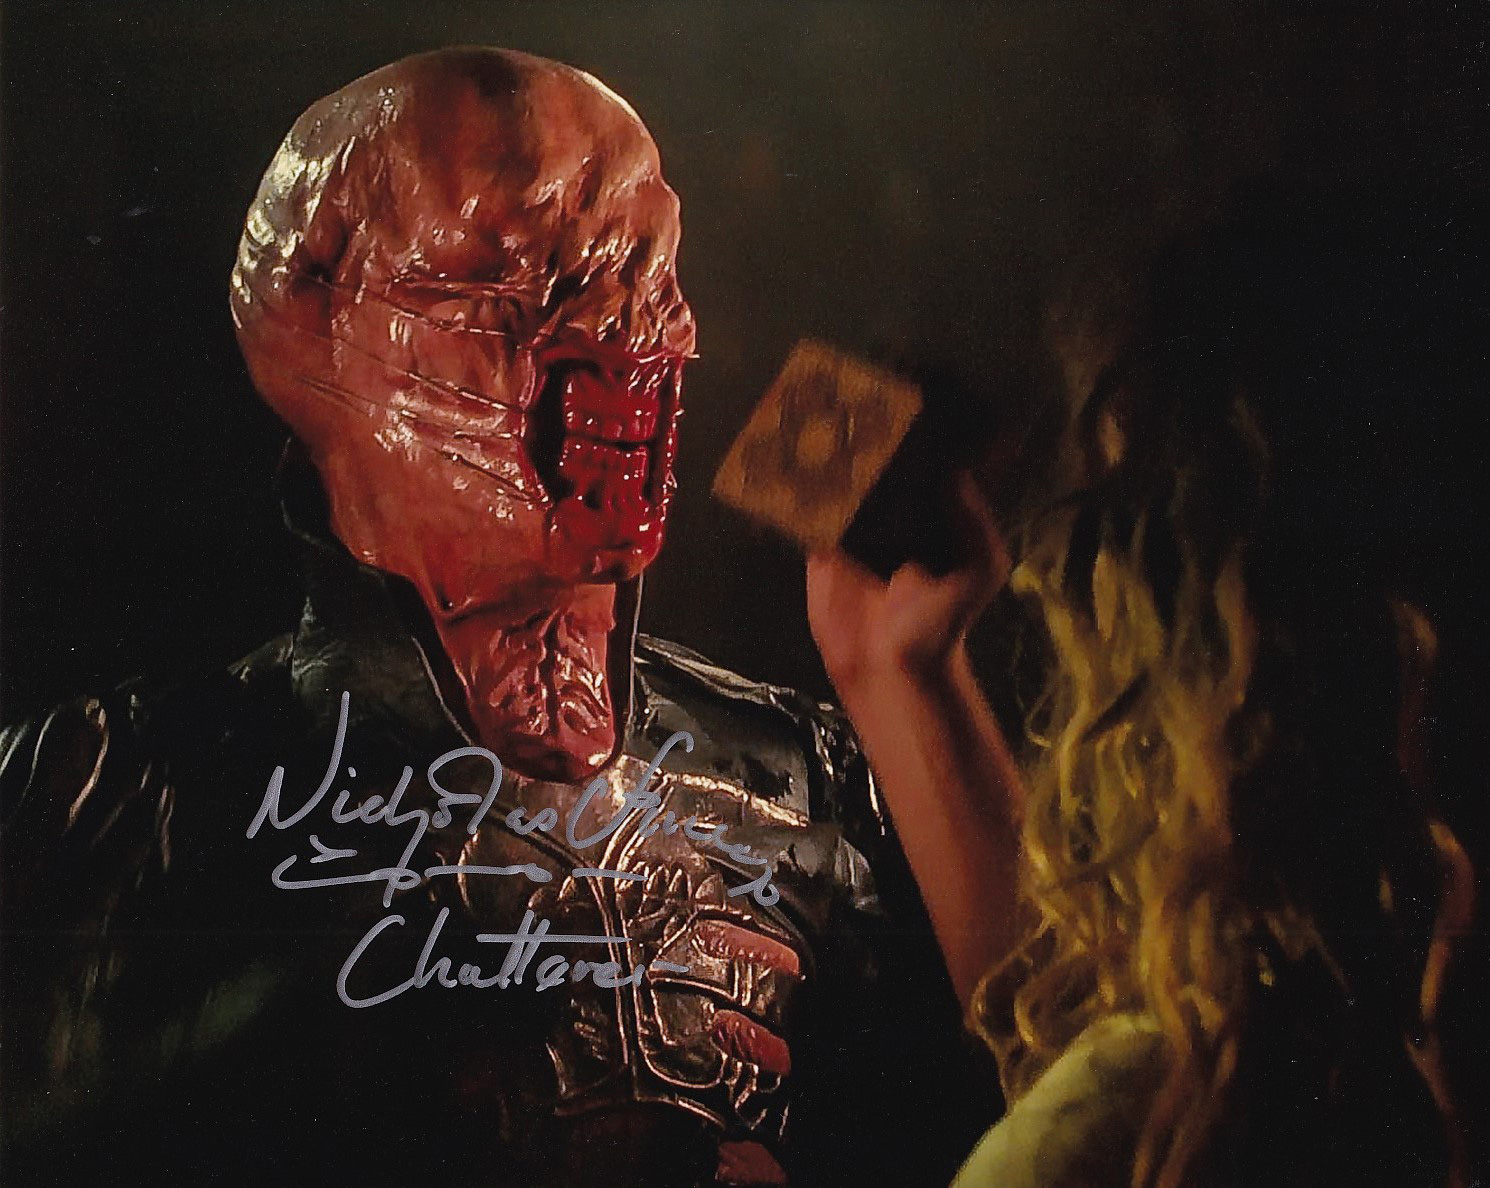 SALE! Lot of 6 Hellraiser hand signed 10x8 photos. This beautiful lot of 4 hand signed photos - Image 7 of 7